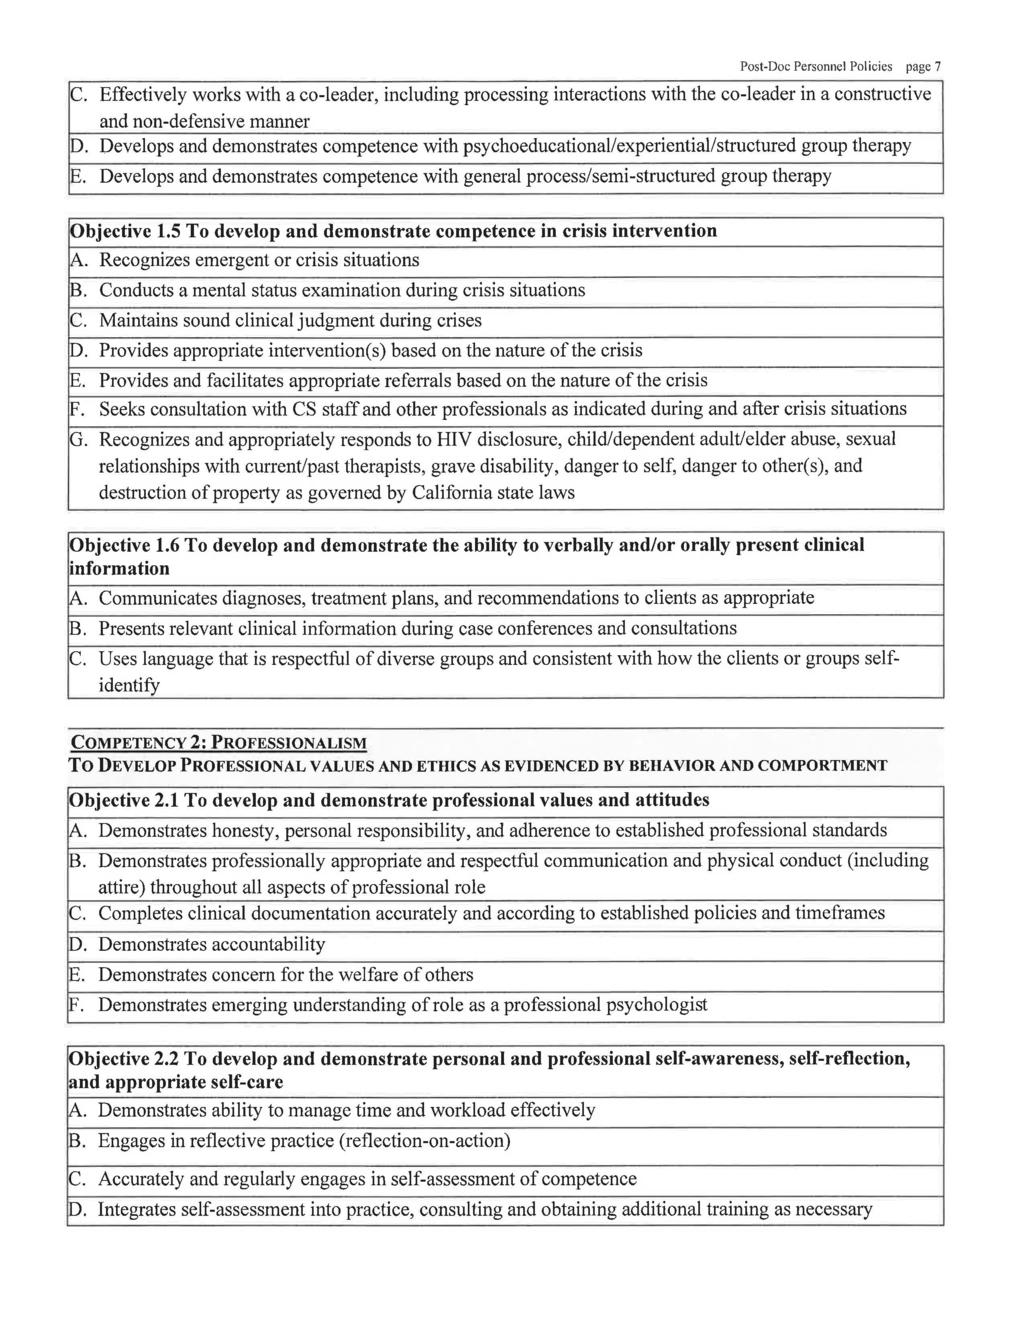 Post-Doc Personnel Policies page 7 C. Effectively works with a co-leader, including processing interactions with the co-leader in a constructive and non-defensive manner D.